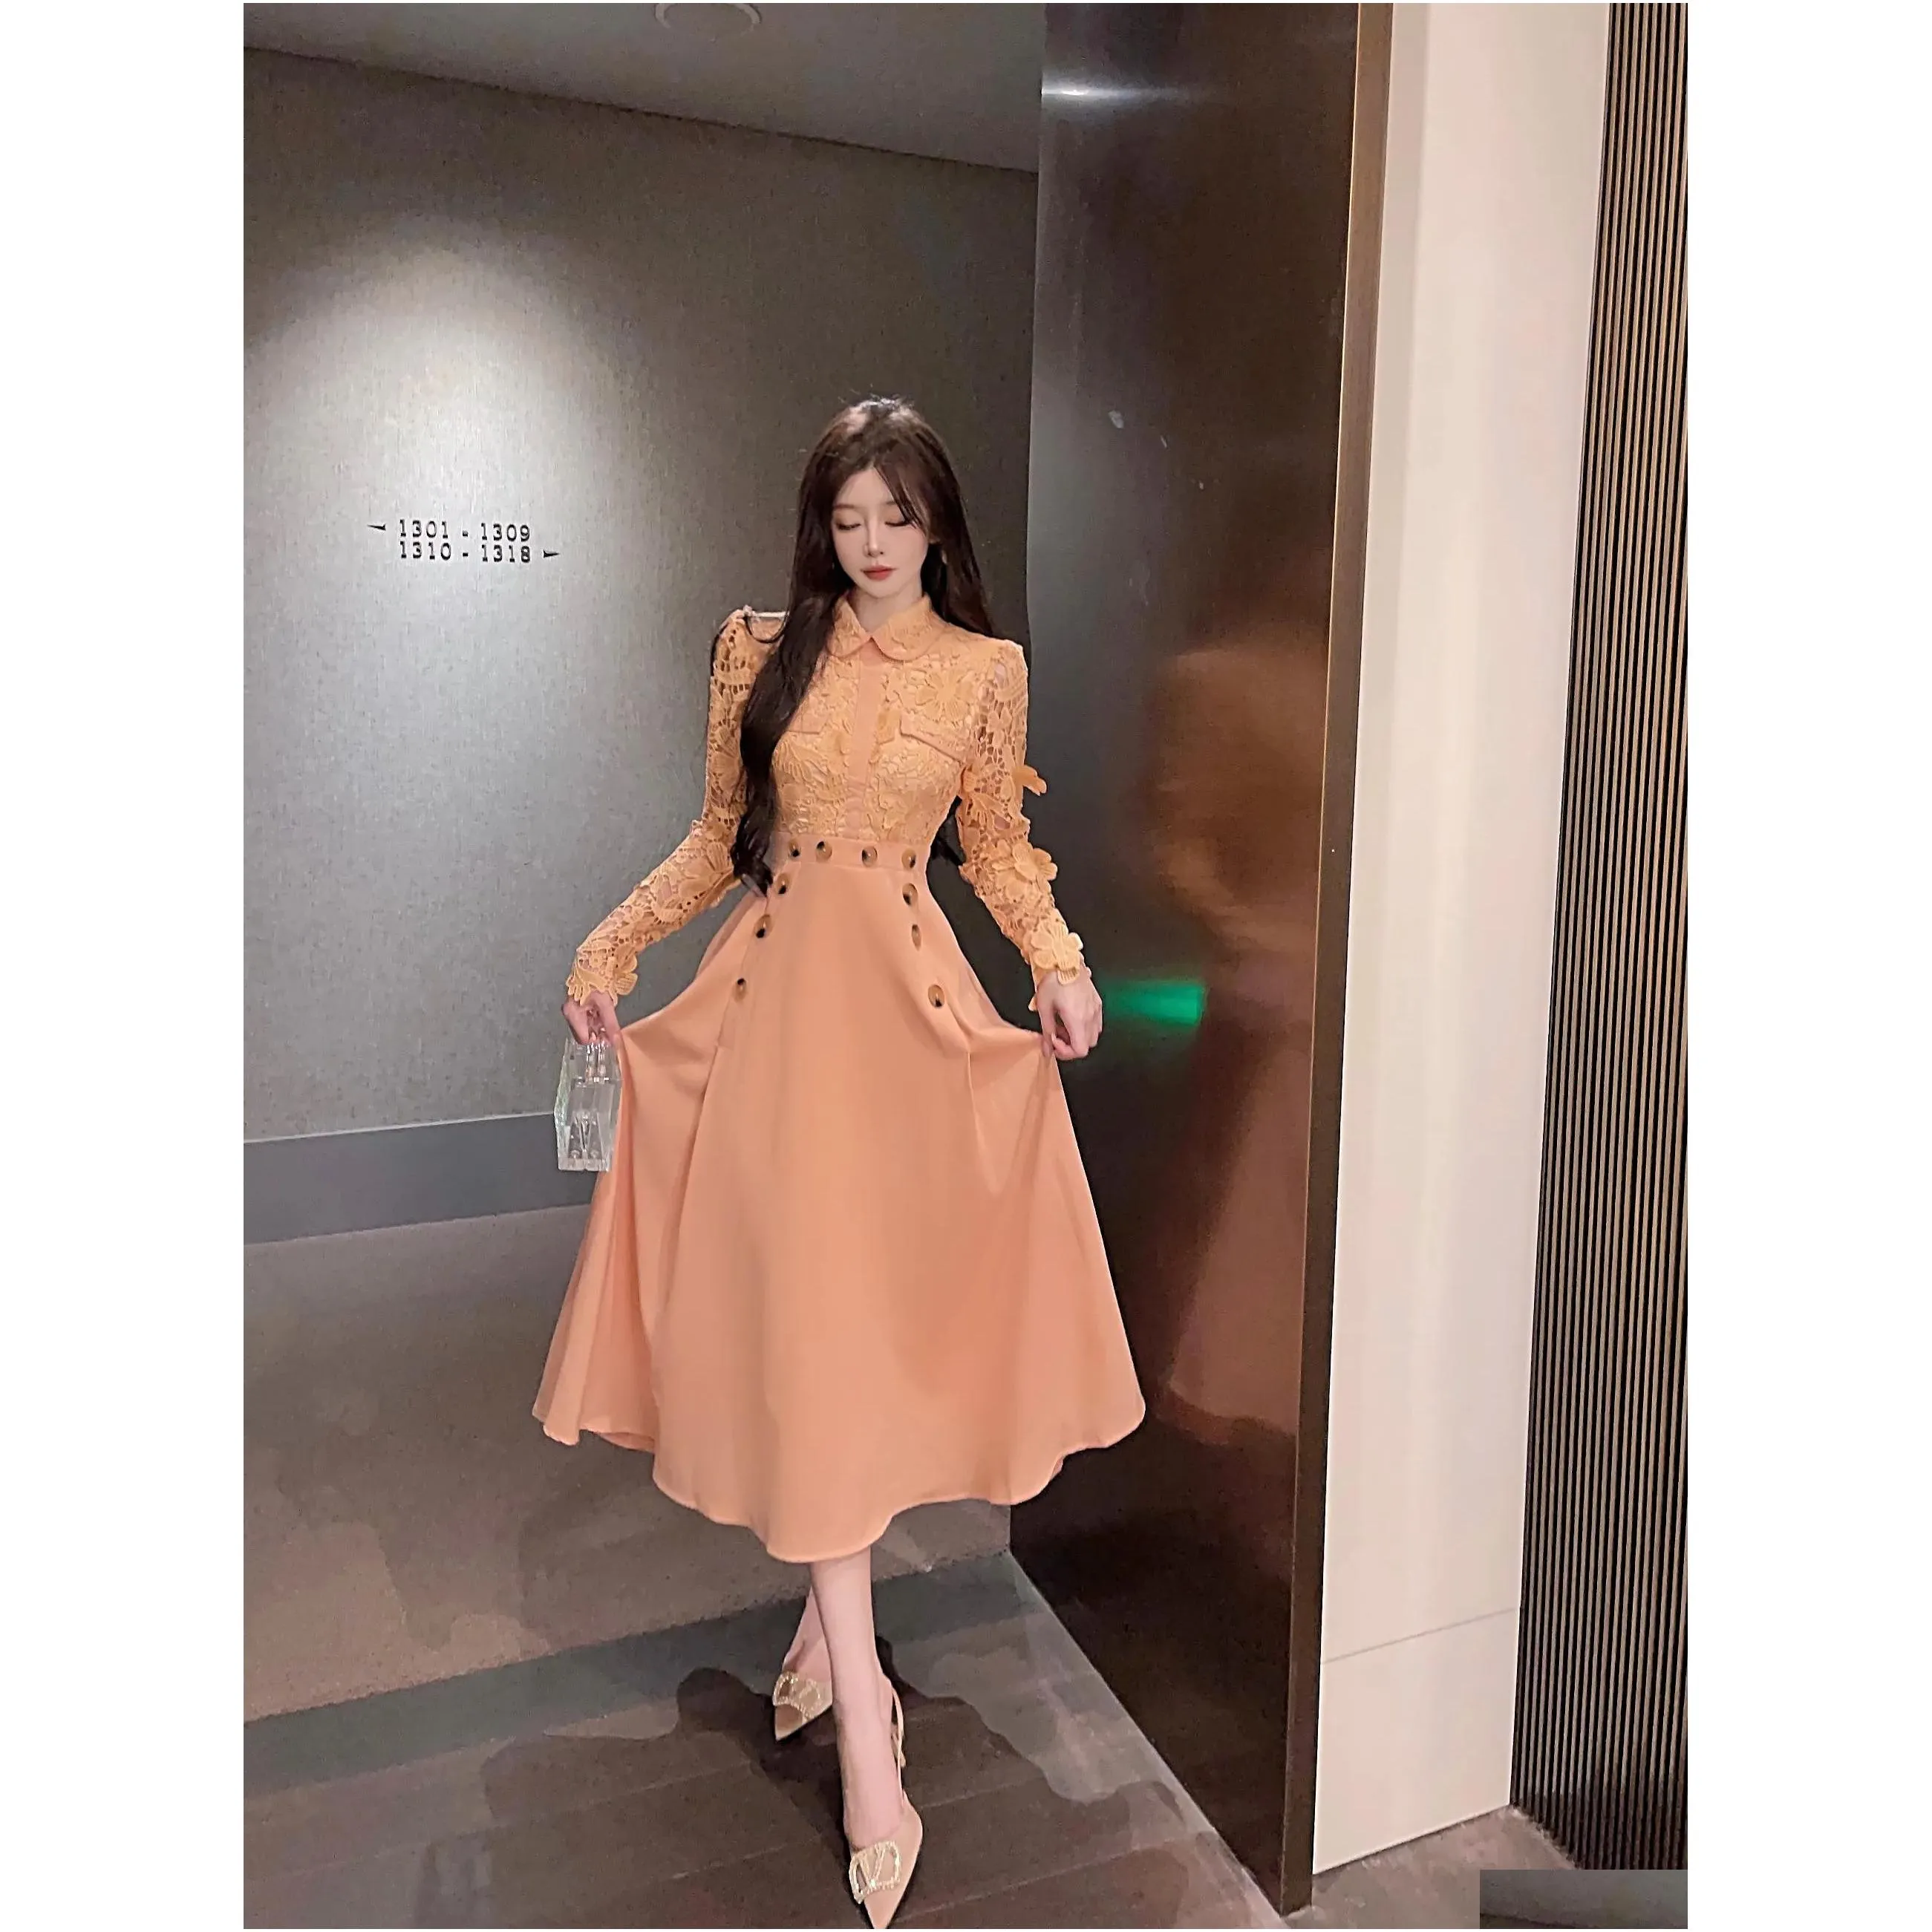 basic casual dresses high-quality new autumn winter lace hollow out embroidery full sleeve dress 3d butterfly slim waist runway long dress